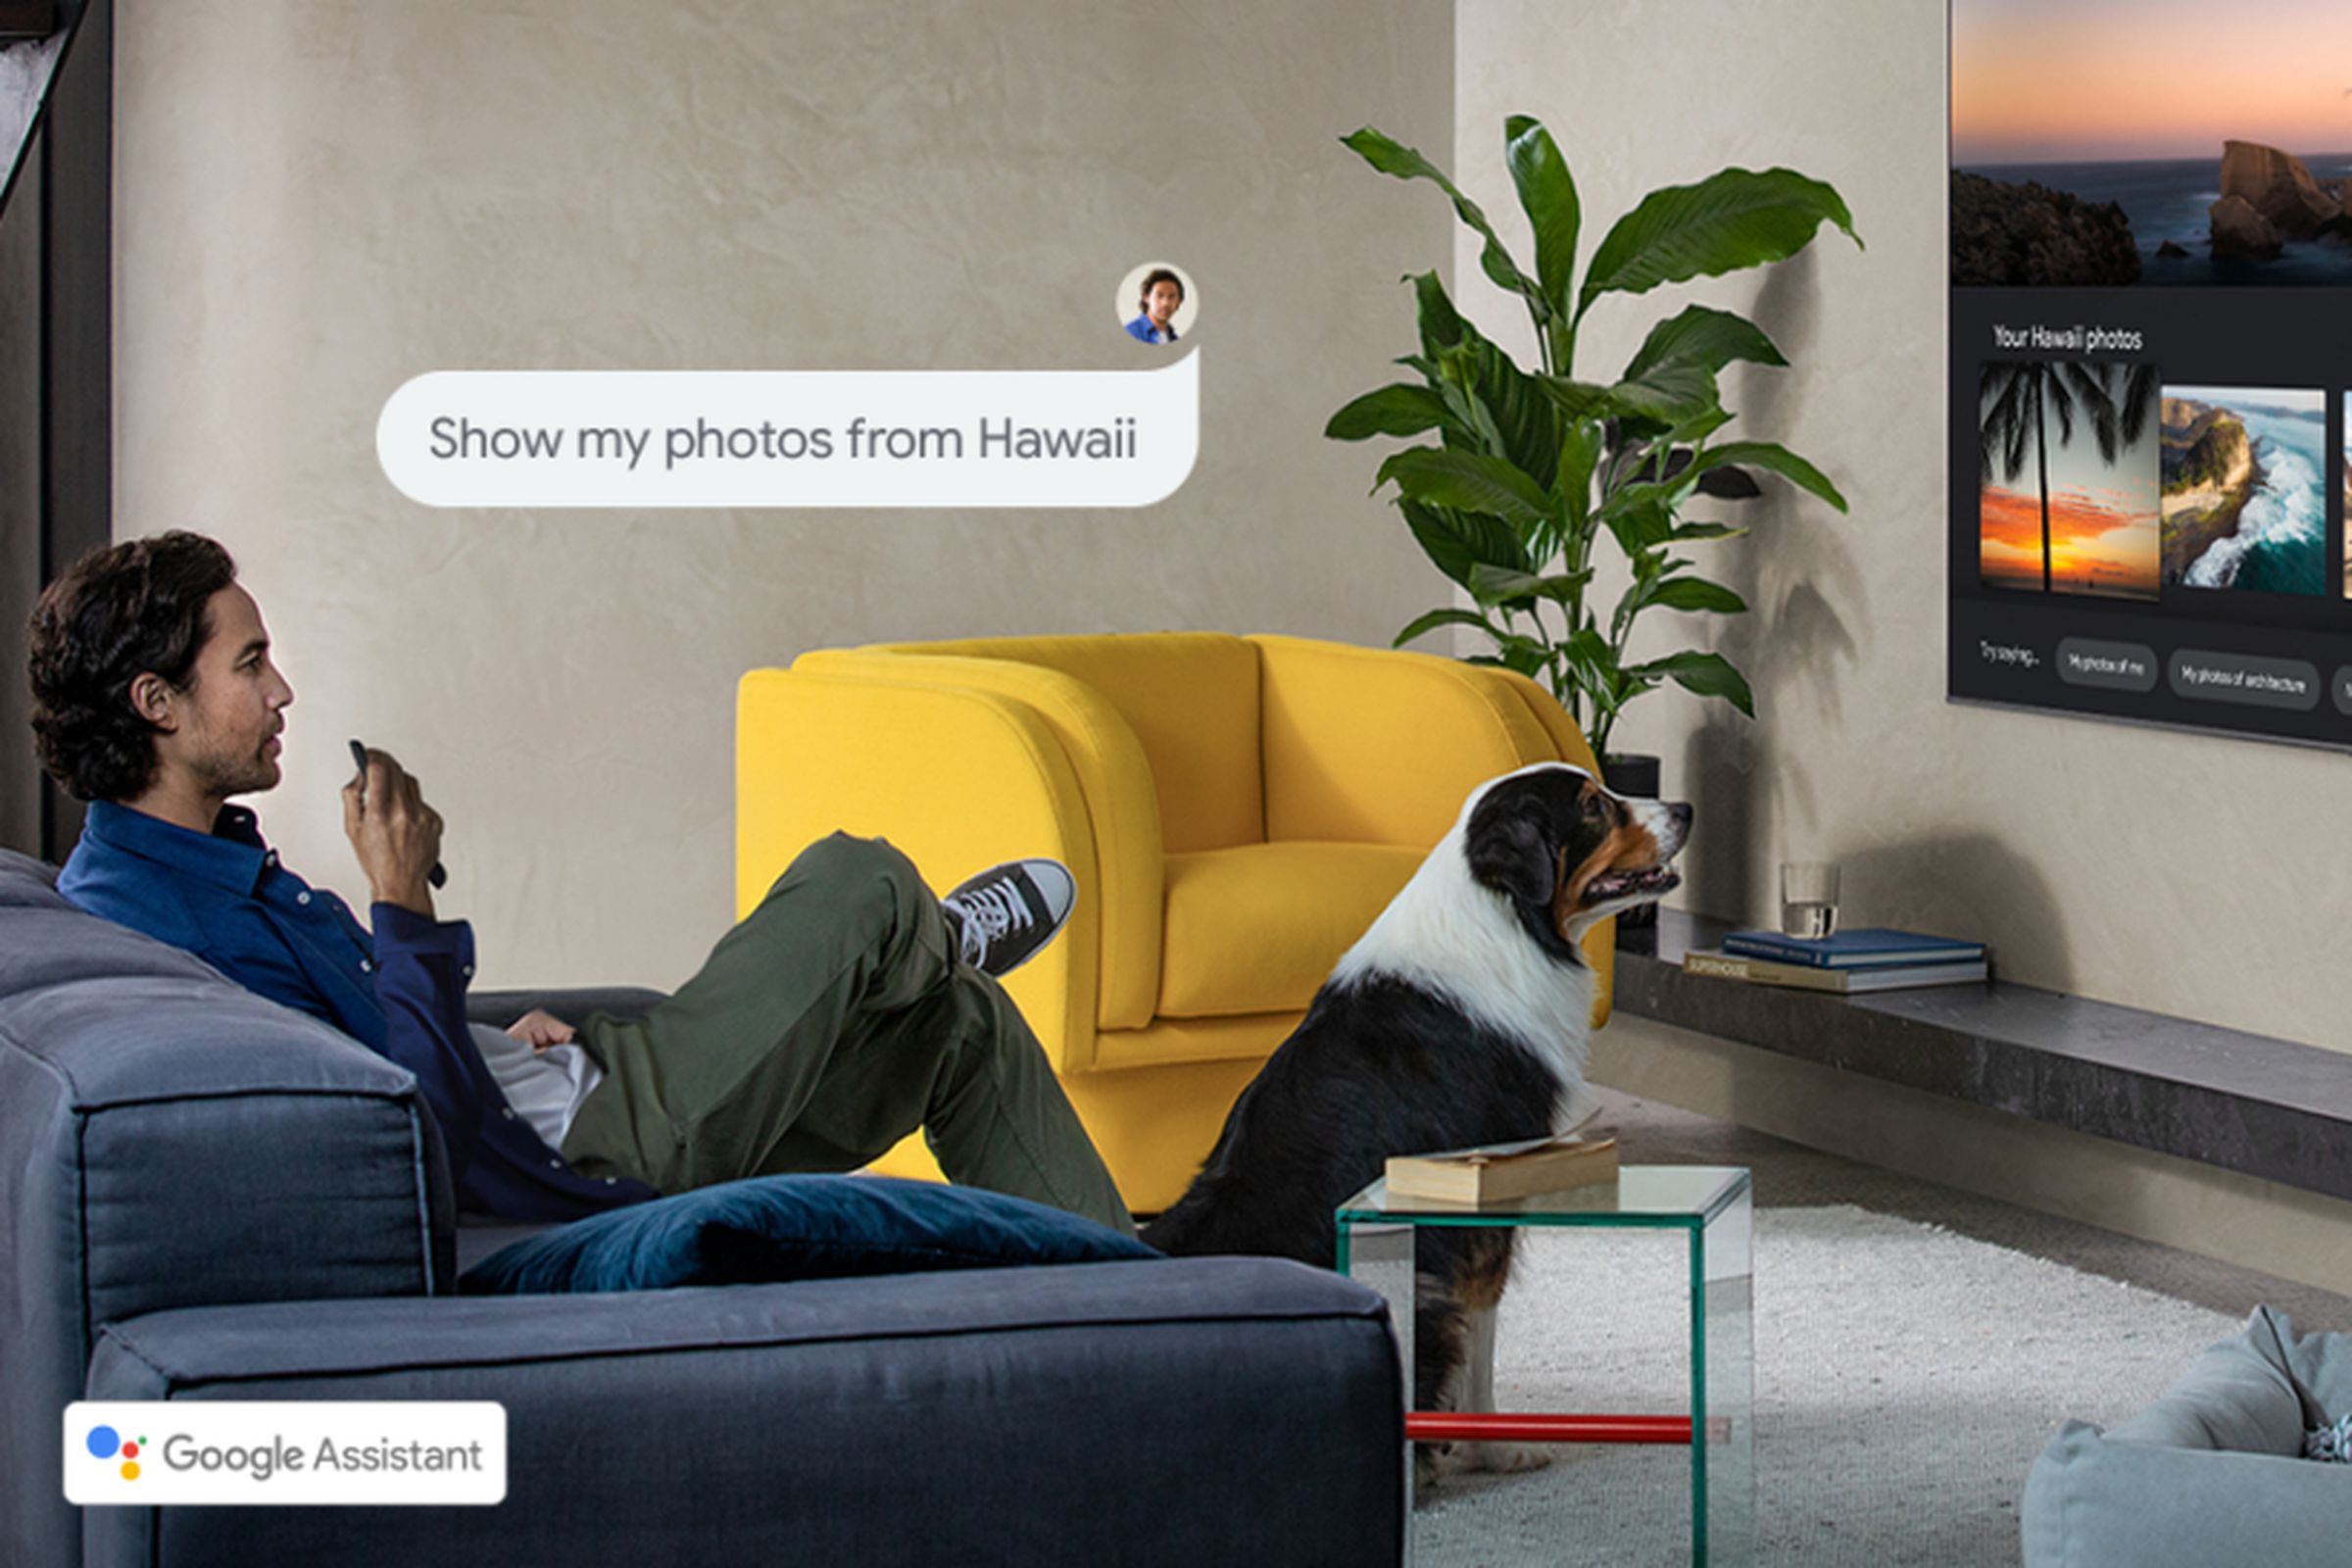 The voice assistant integrates with other Google services like Photos.